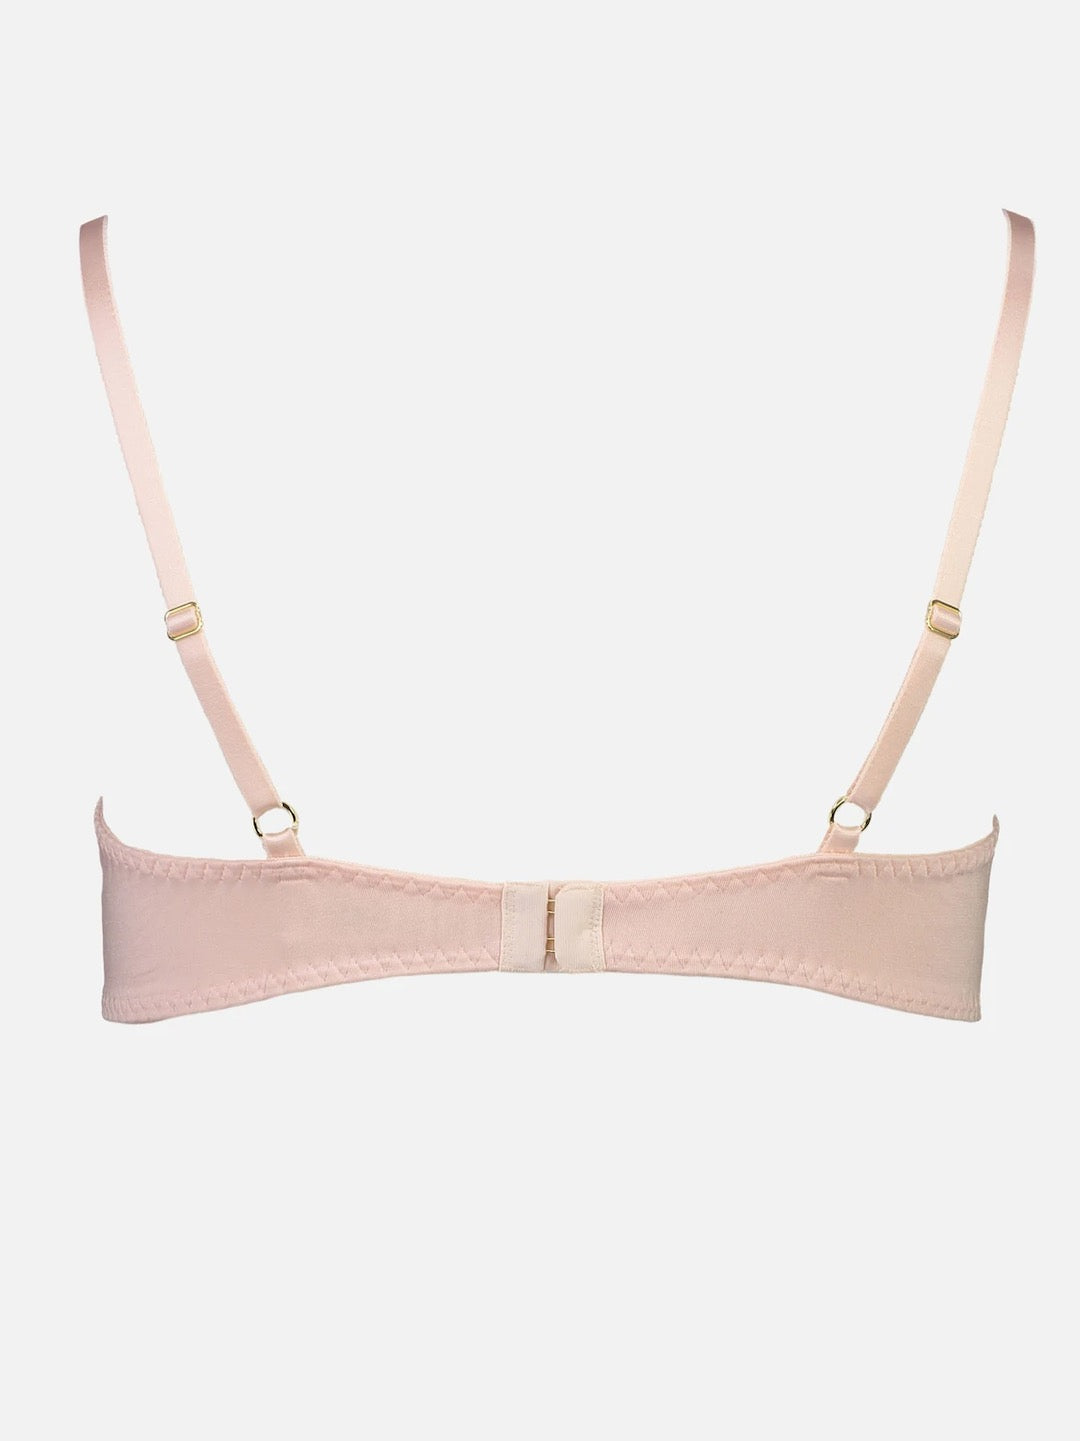 A Rosy Maggie Bra by Videris with two straps on the back.